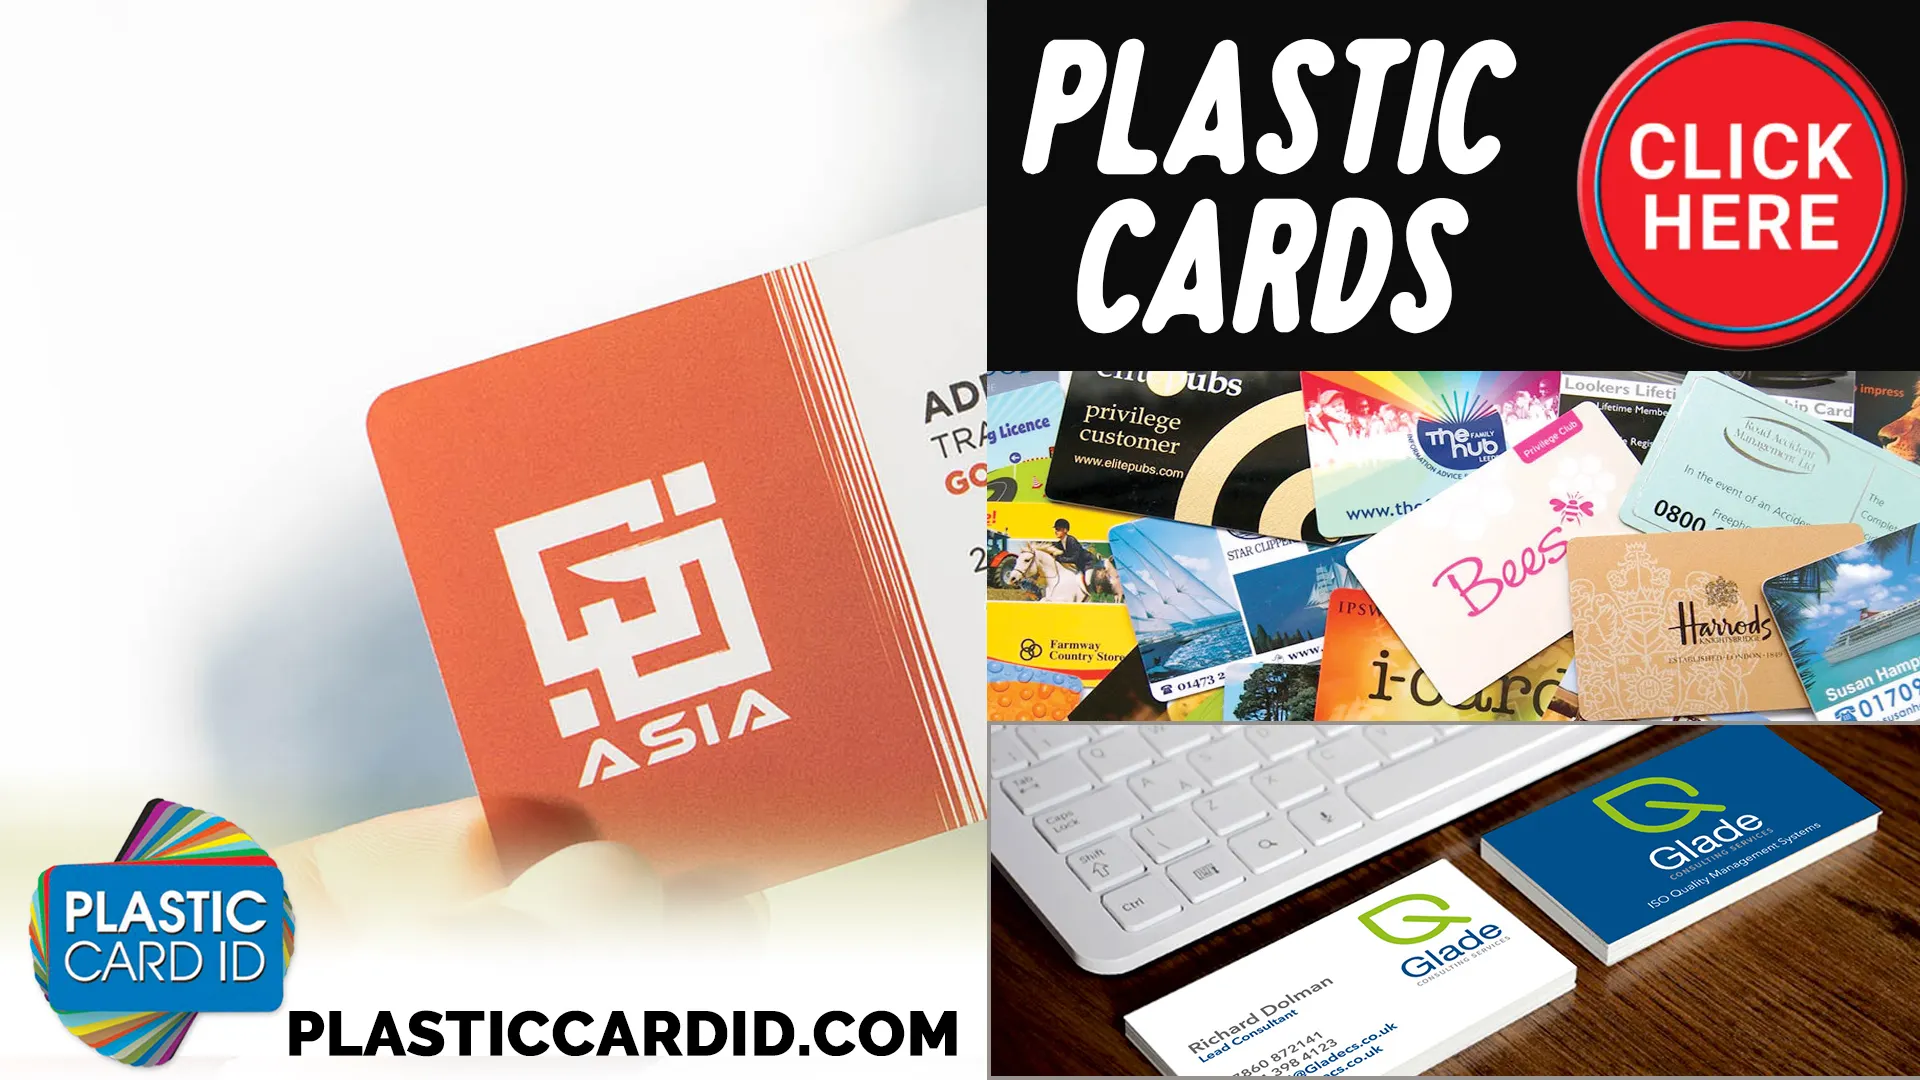 Custom Card Solutions for Every Business Need